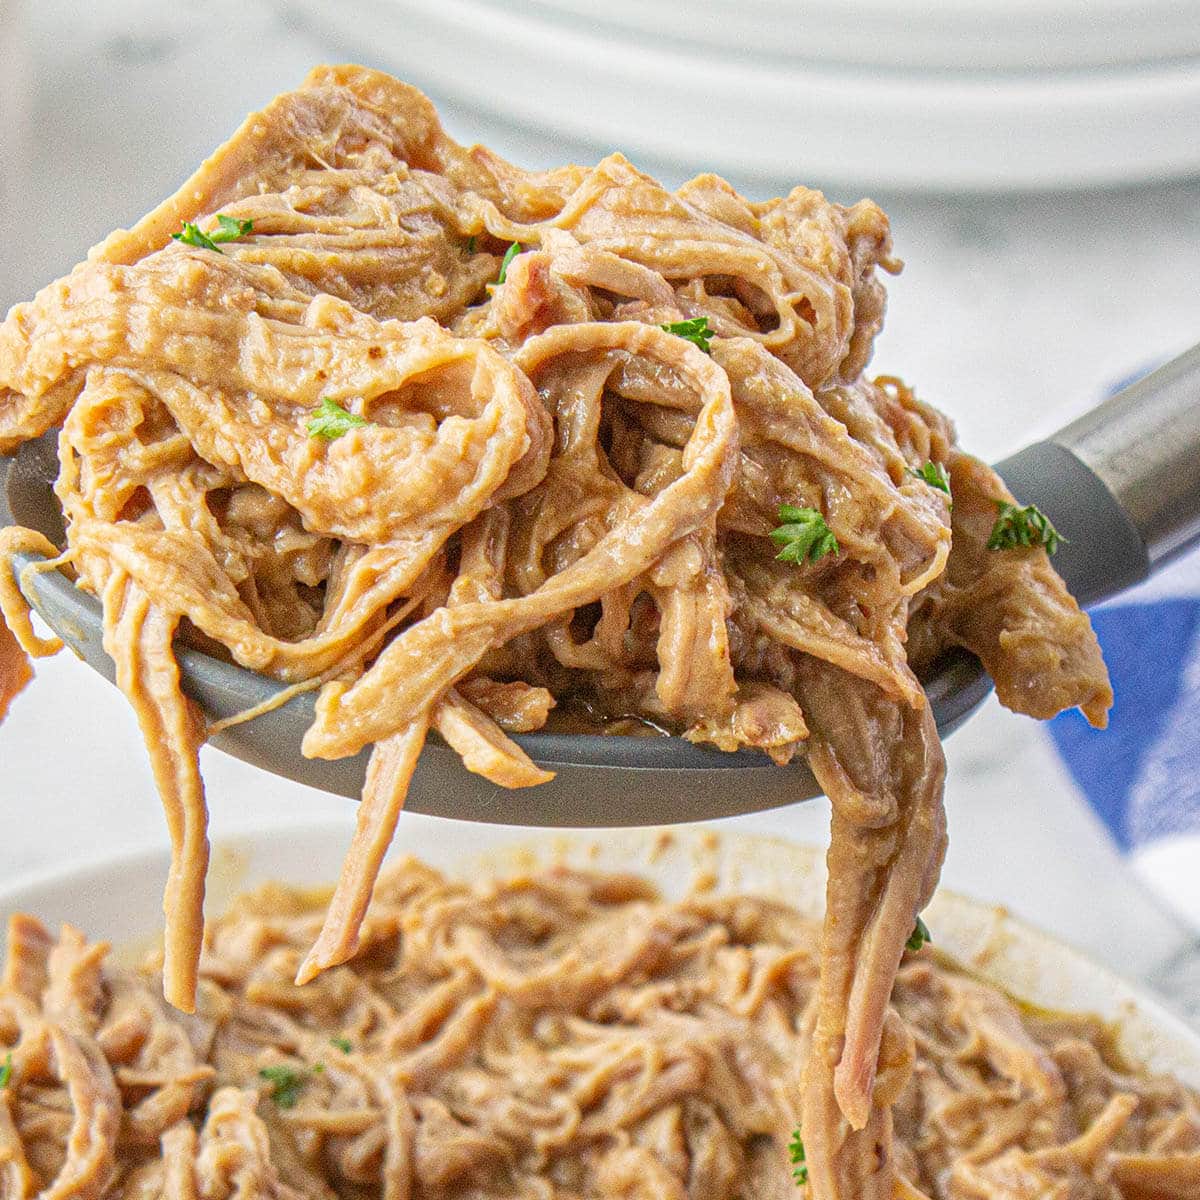 Crockpot pork tenderloin and gravy shredded and in large bowl with serving spoon.